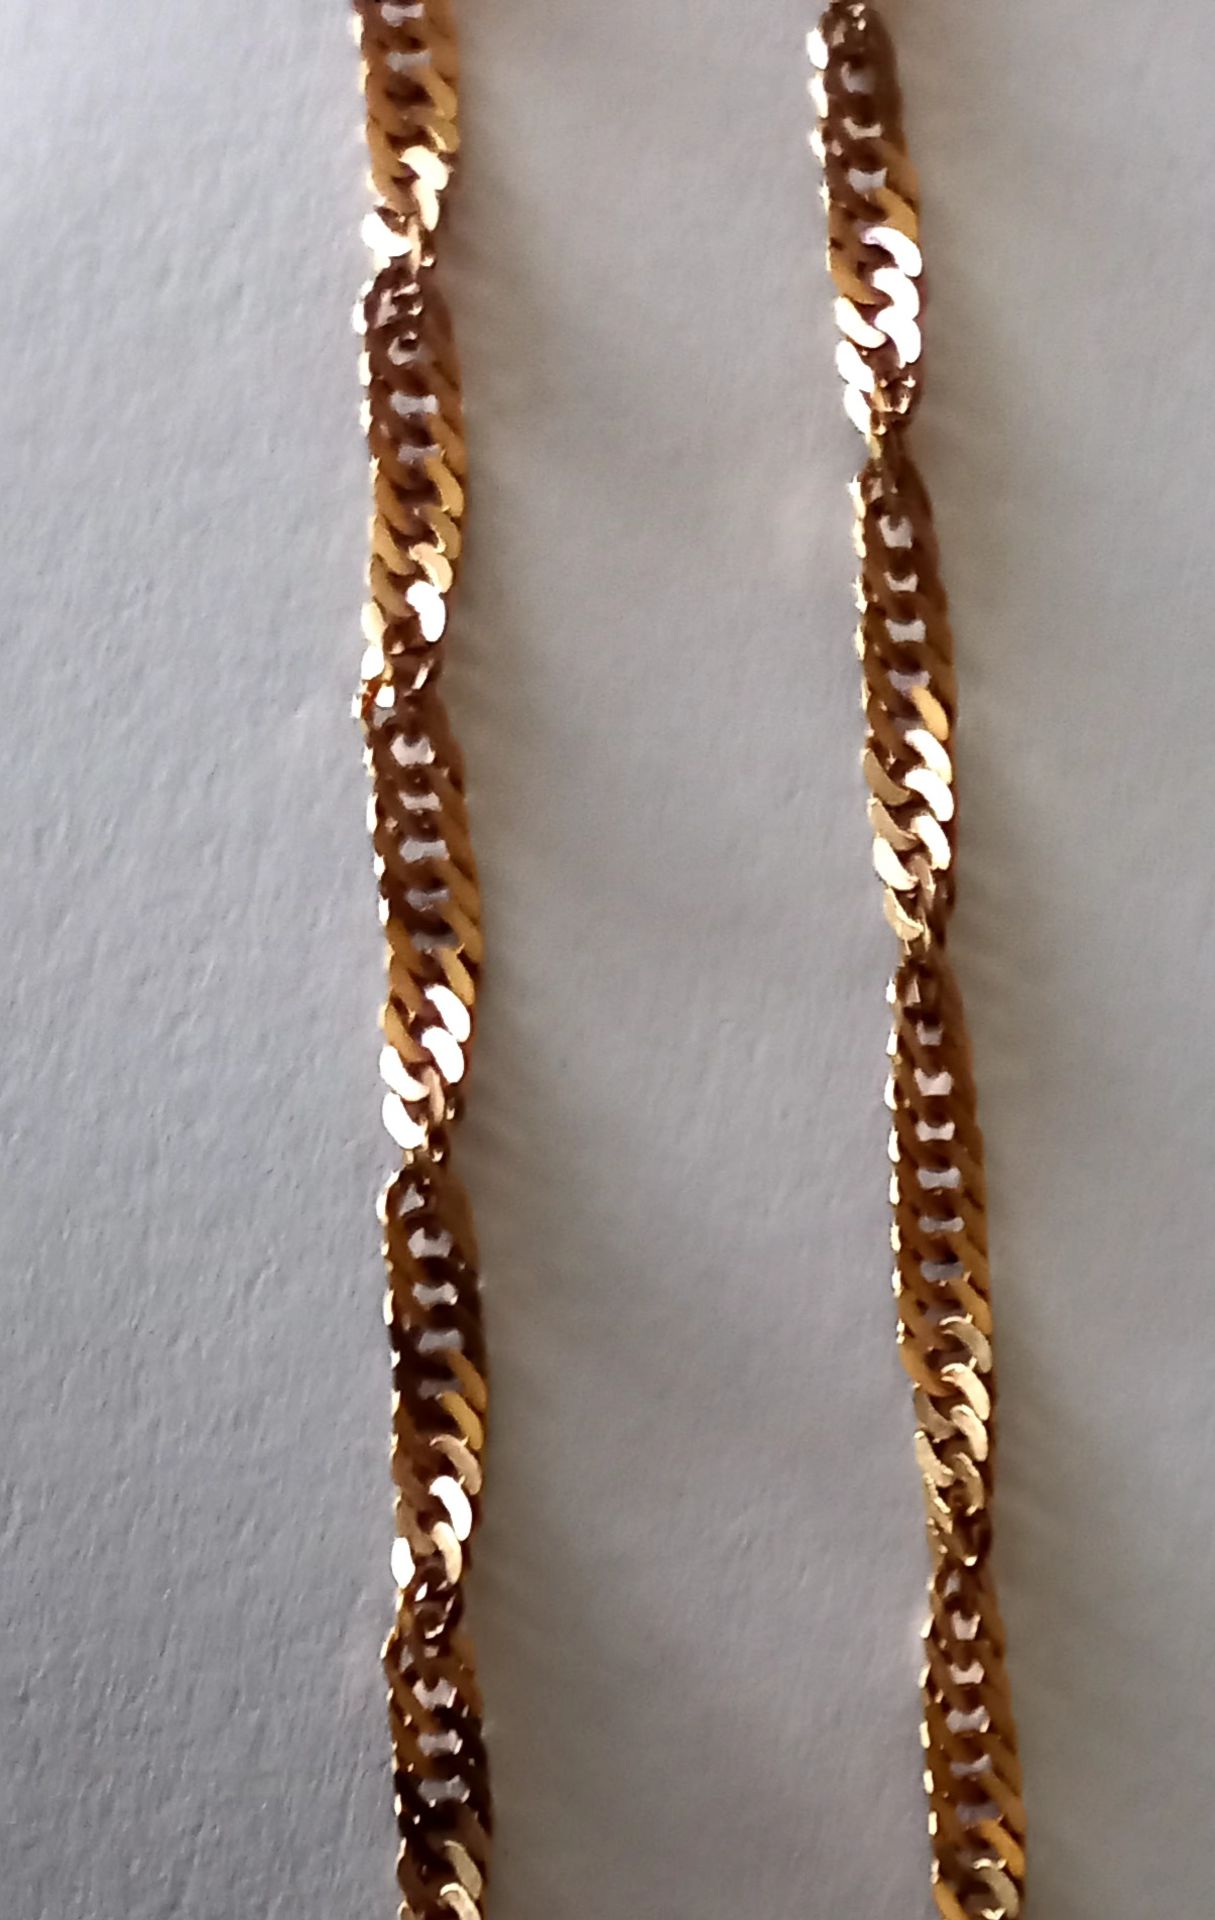 9ct Gold Curbed Link Chain. 20 inches long. 4.79g - Image 2 of 3